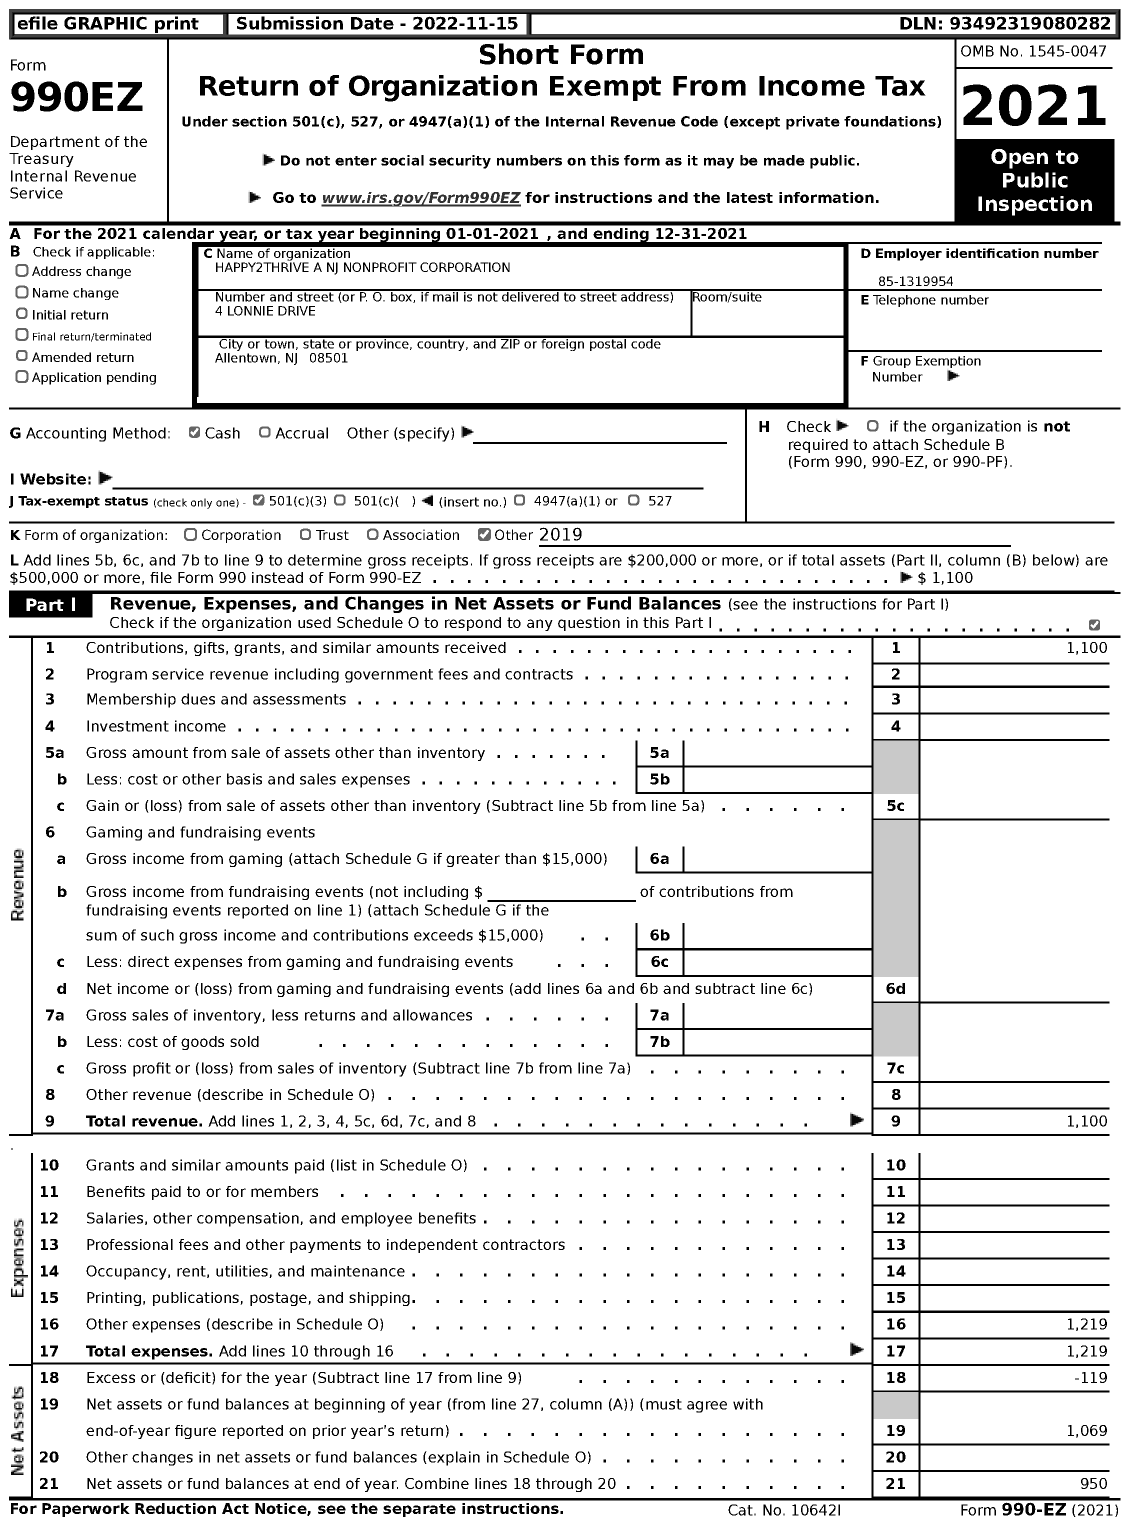 Image of first page of 2021 Form 990EZ for Happy2thrive A NJ Nonprofit Corporation